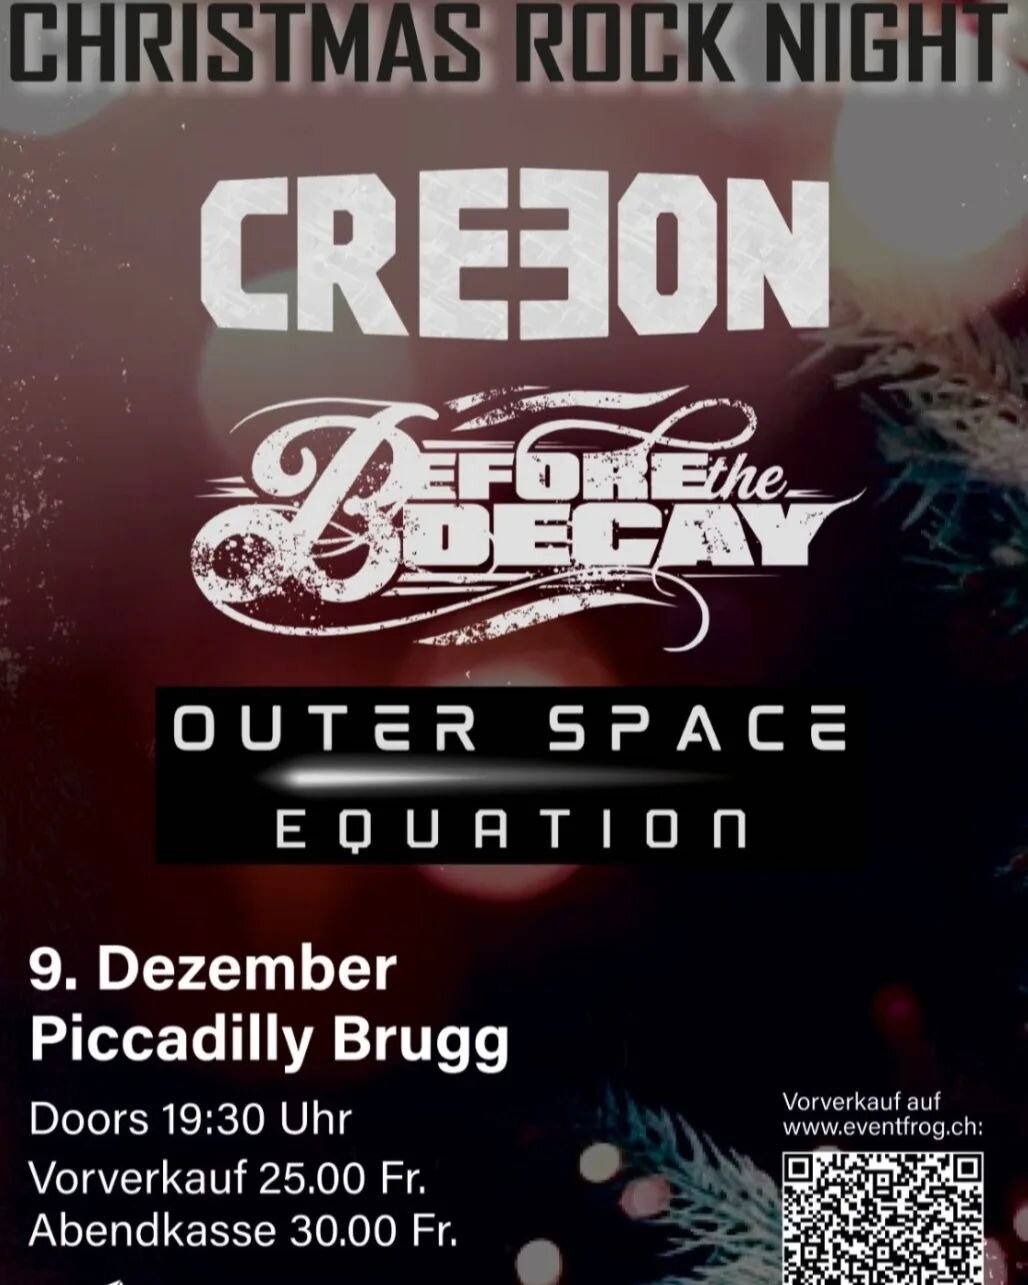 We'll play at the 9th of Dezember in Picadilly Brugg together with @creeonofficial and @outerspaceequation!🔥

May the breakdown be with you 👽🤘👽

Pre sales on eventfrog. Link in Bio 

Who's in?

Looking forward to each end everyone of you partying